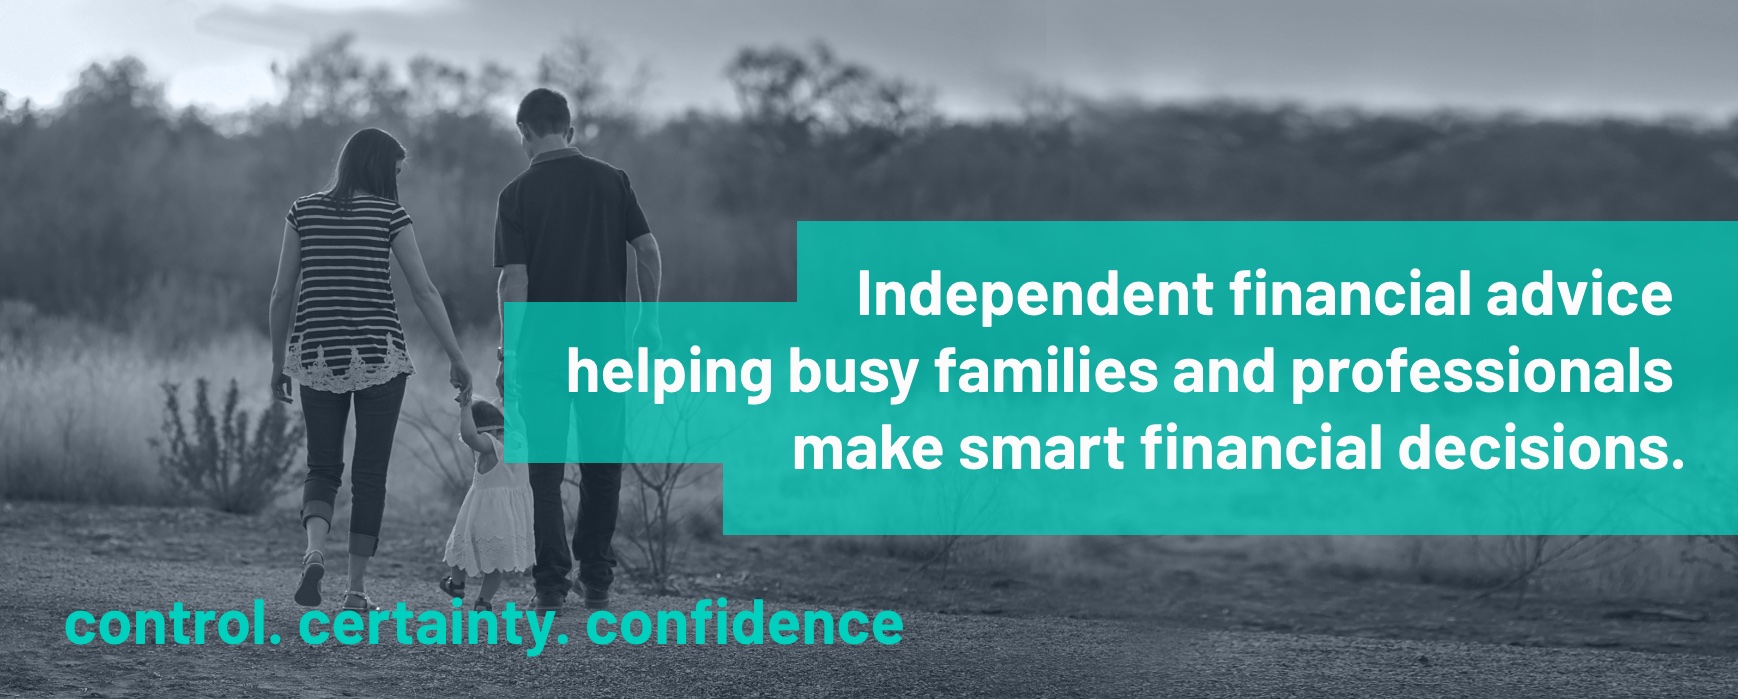 Independent Financial Advice - helping busy families and professionals make smart decisions